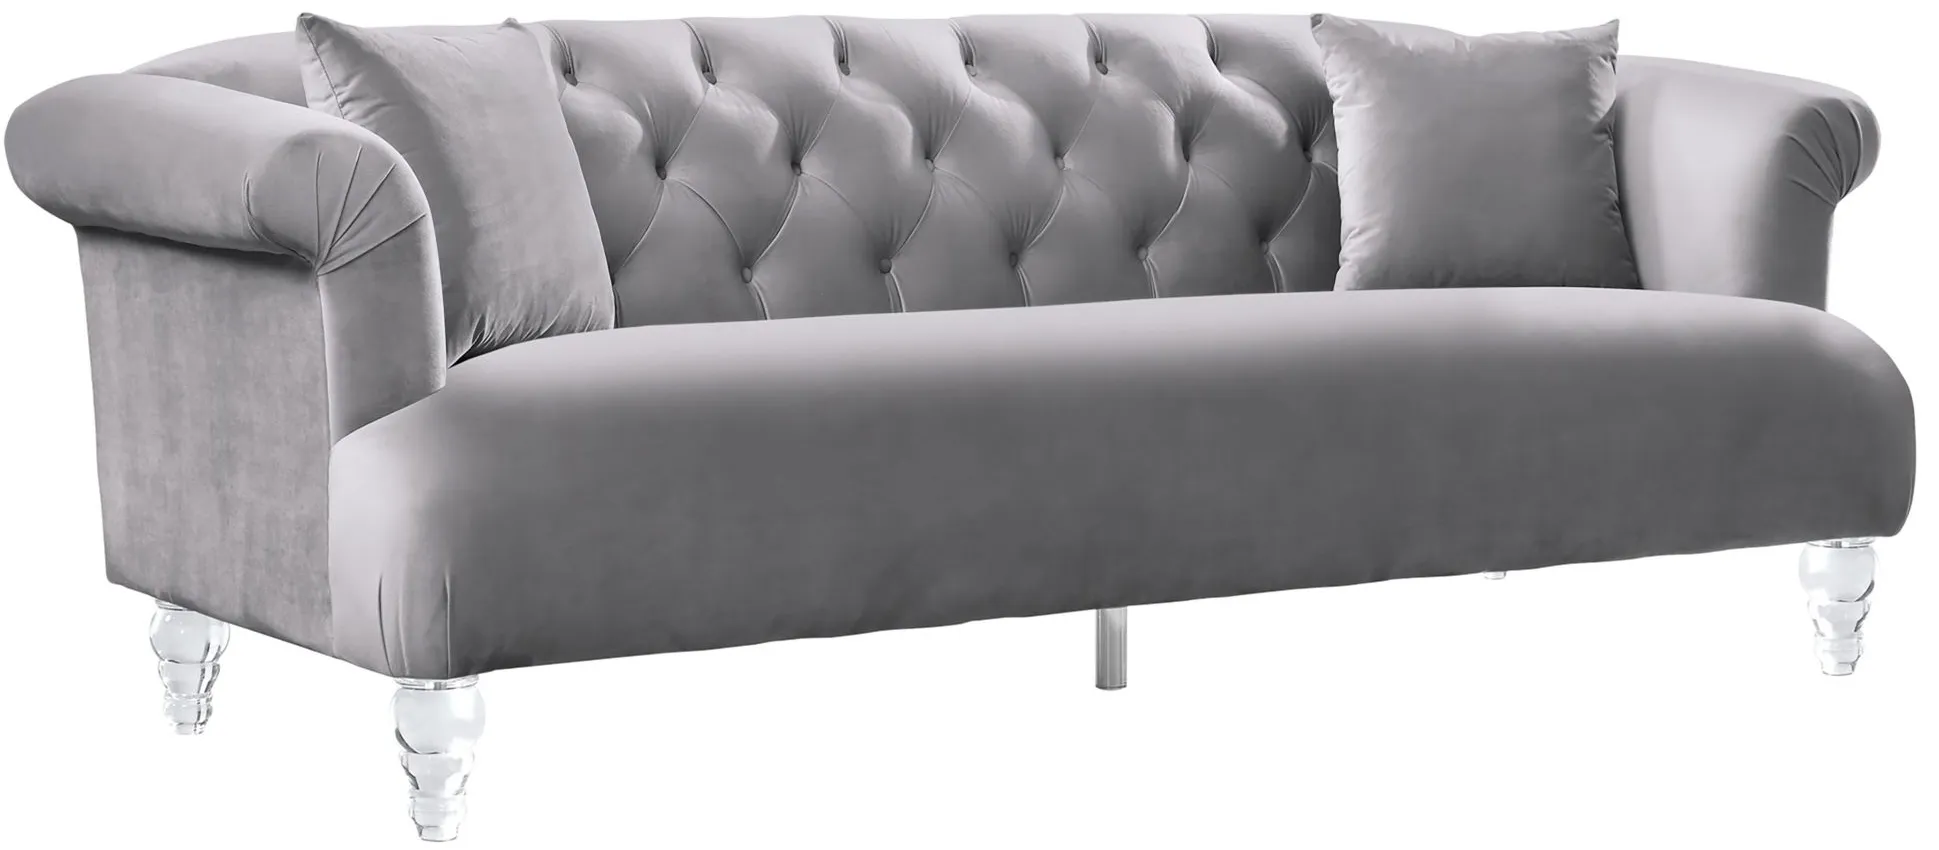 Angeline Sofa in Gray by Armen Living